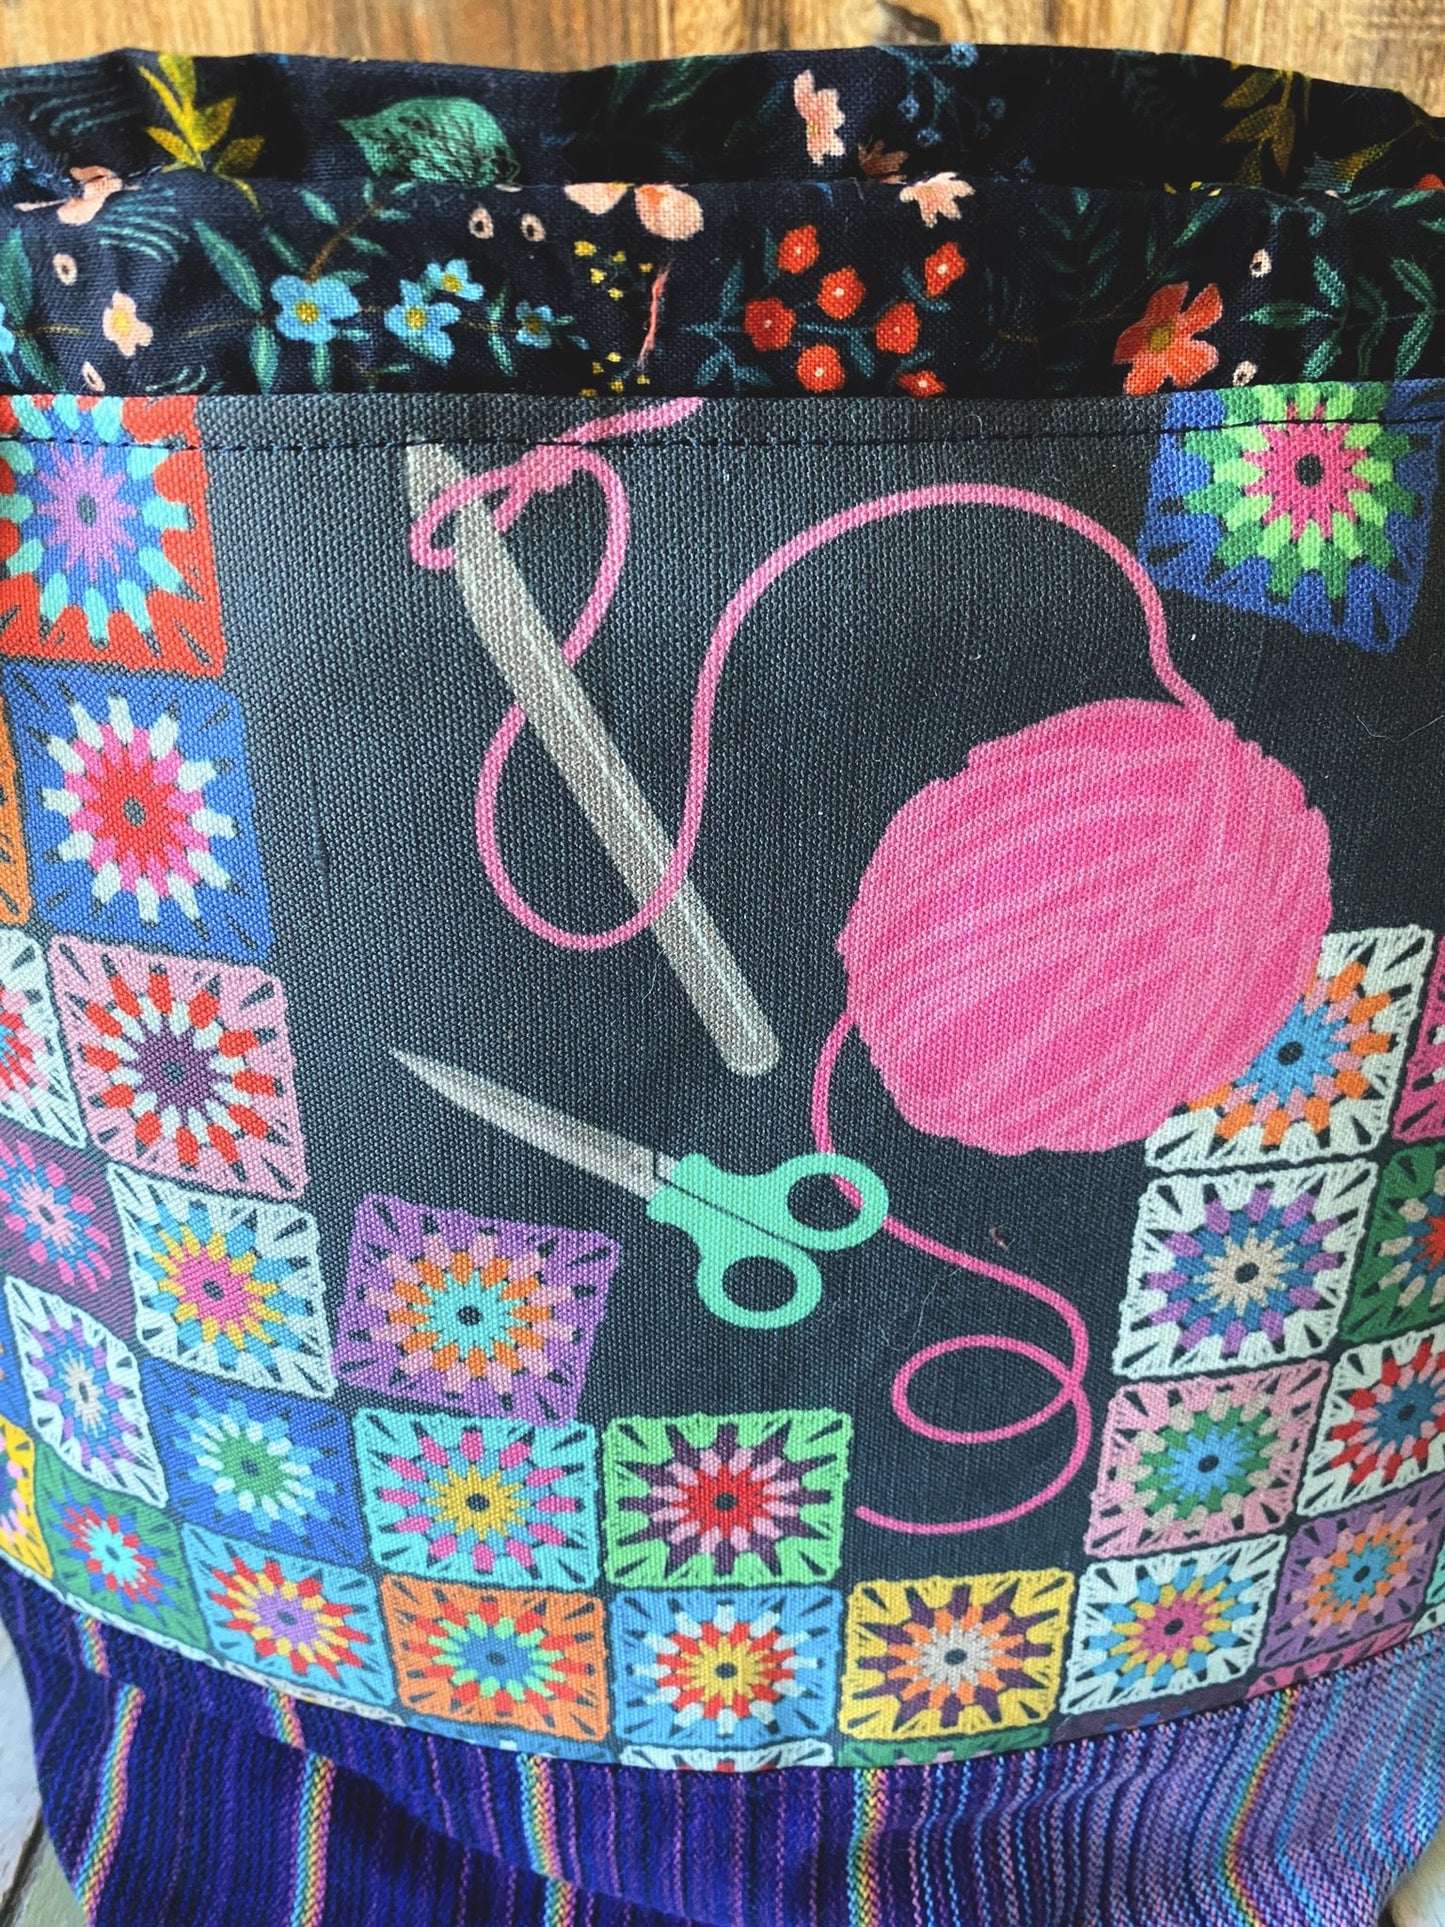 Granny Square and Crochet Party Large Project Bag